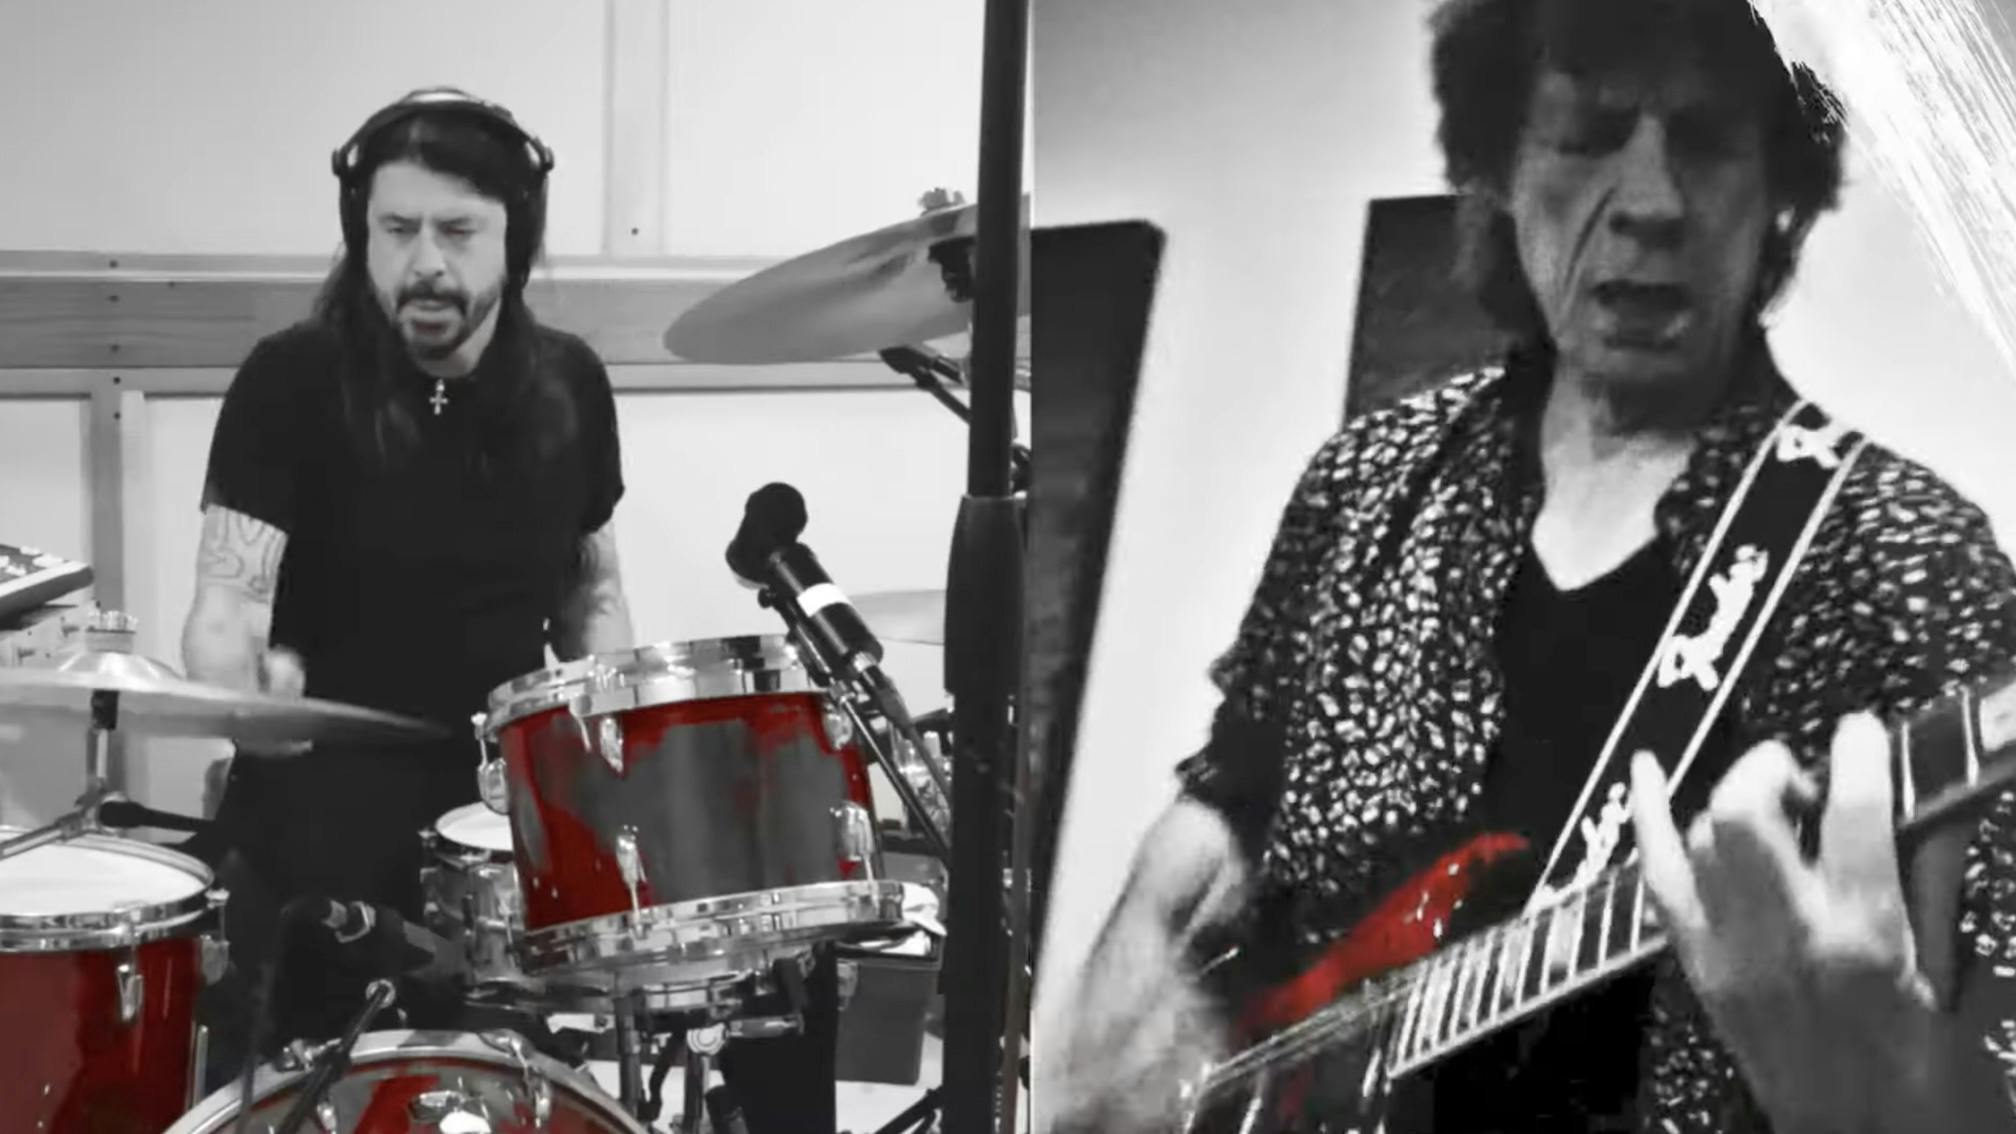 Dave Grohl guests on Mick Jagger's surprise new single, Eazy Sleazy